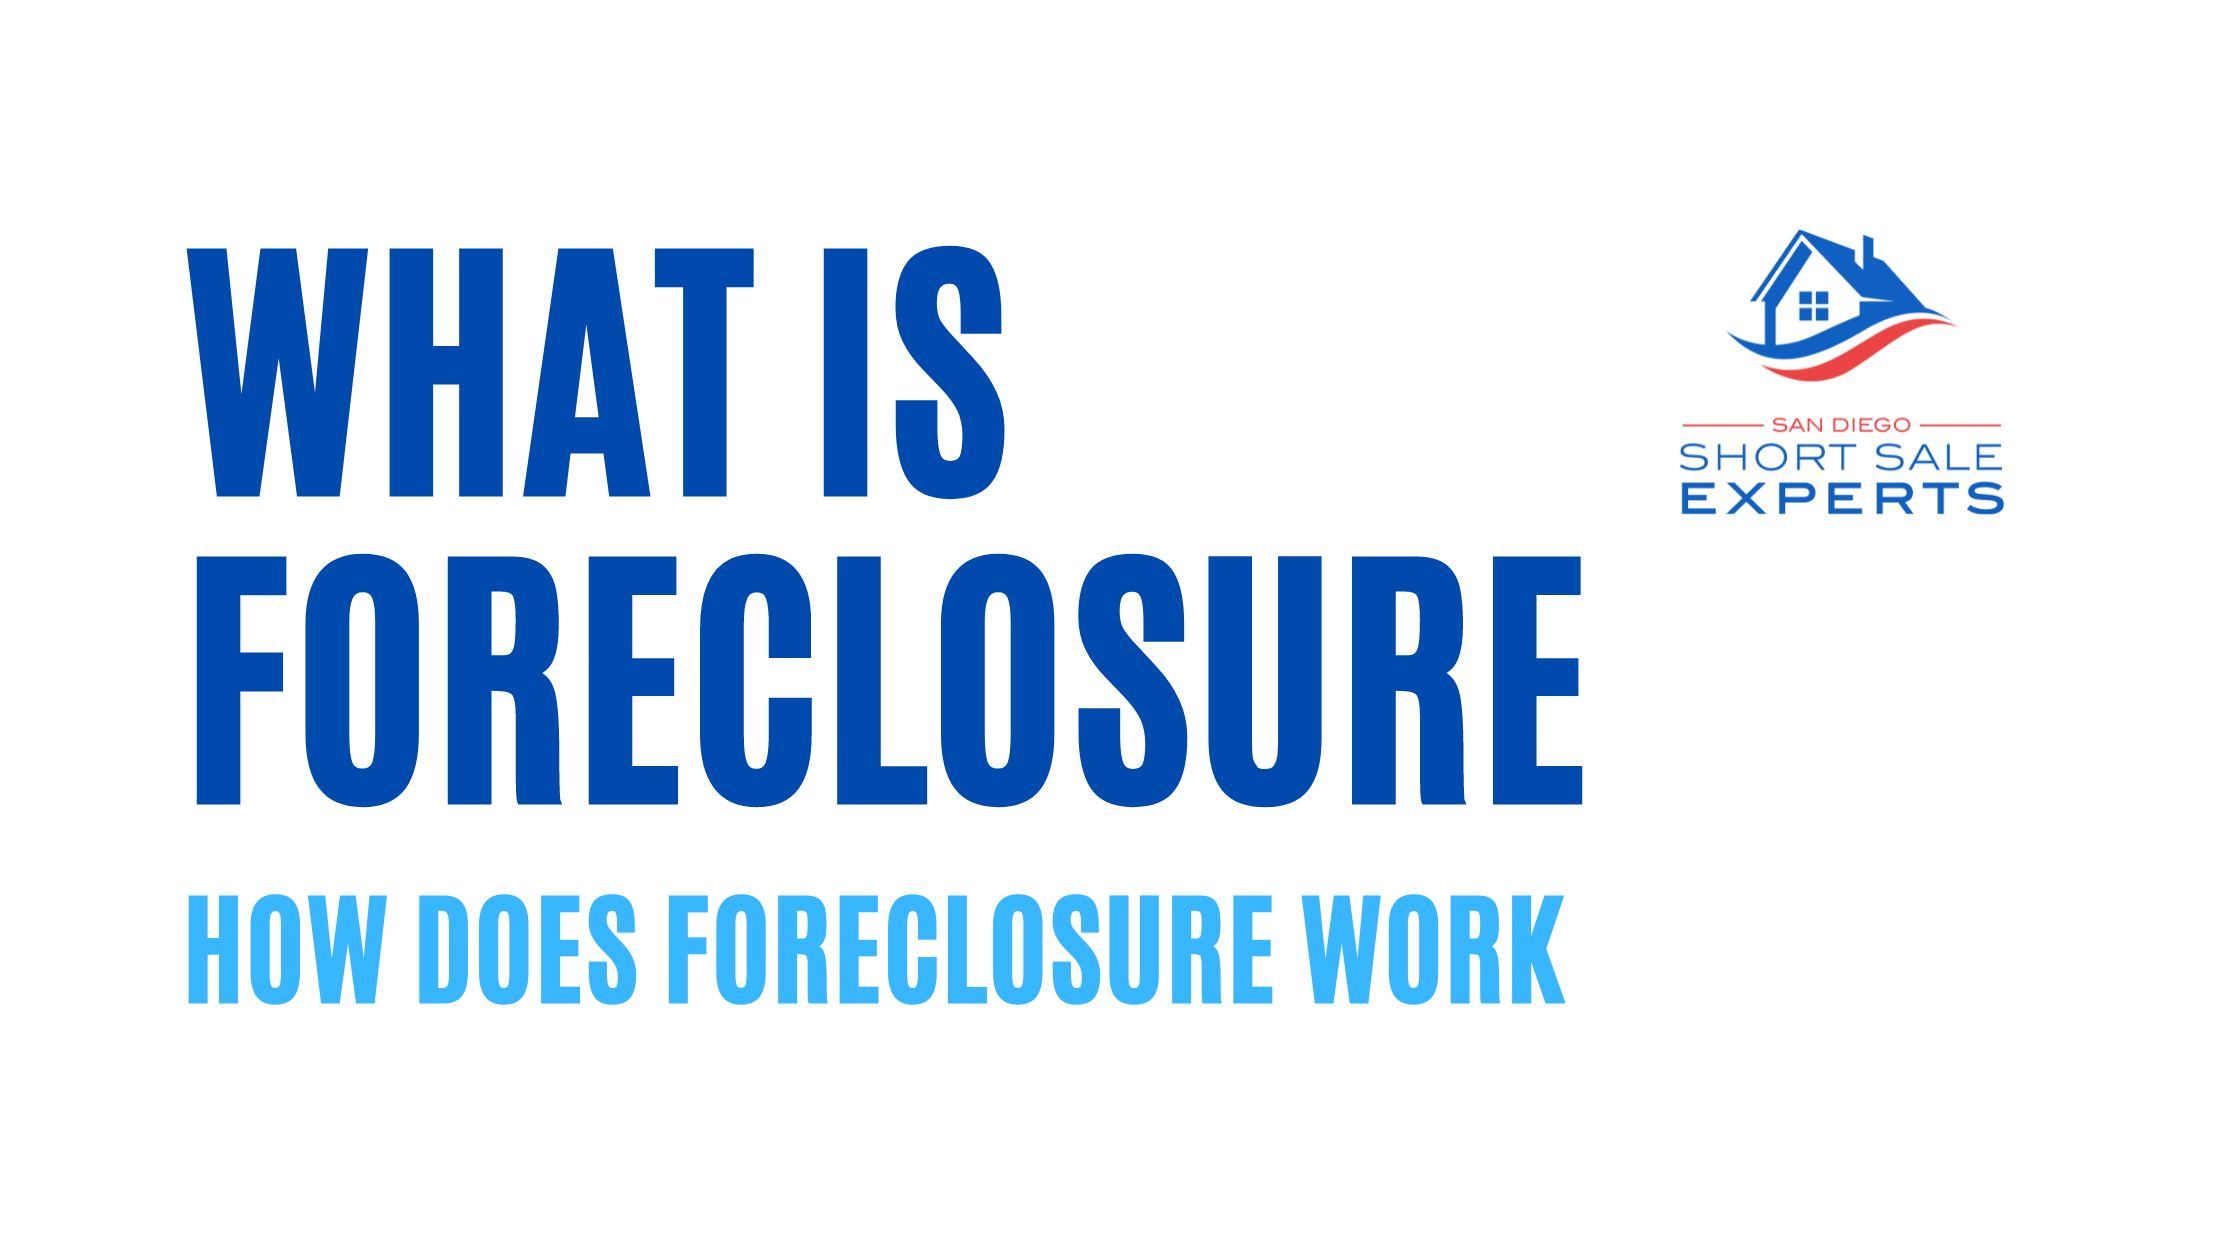 What is Foreclosure